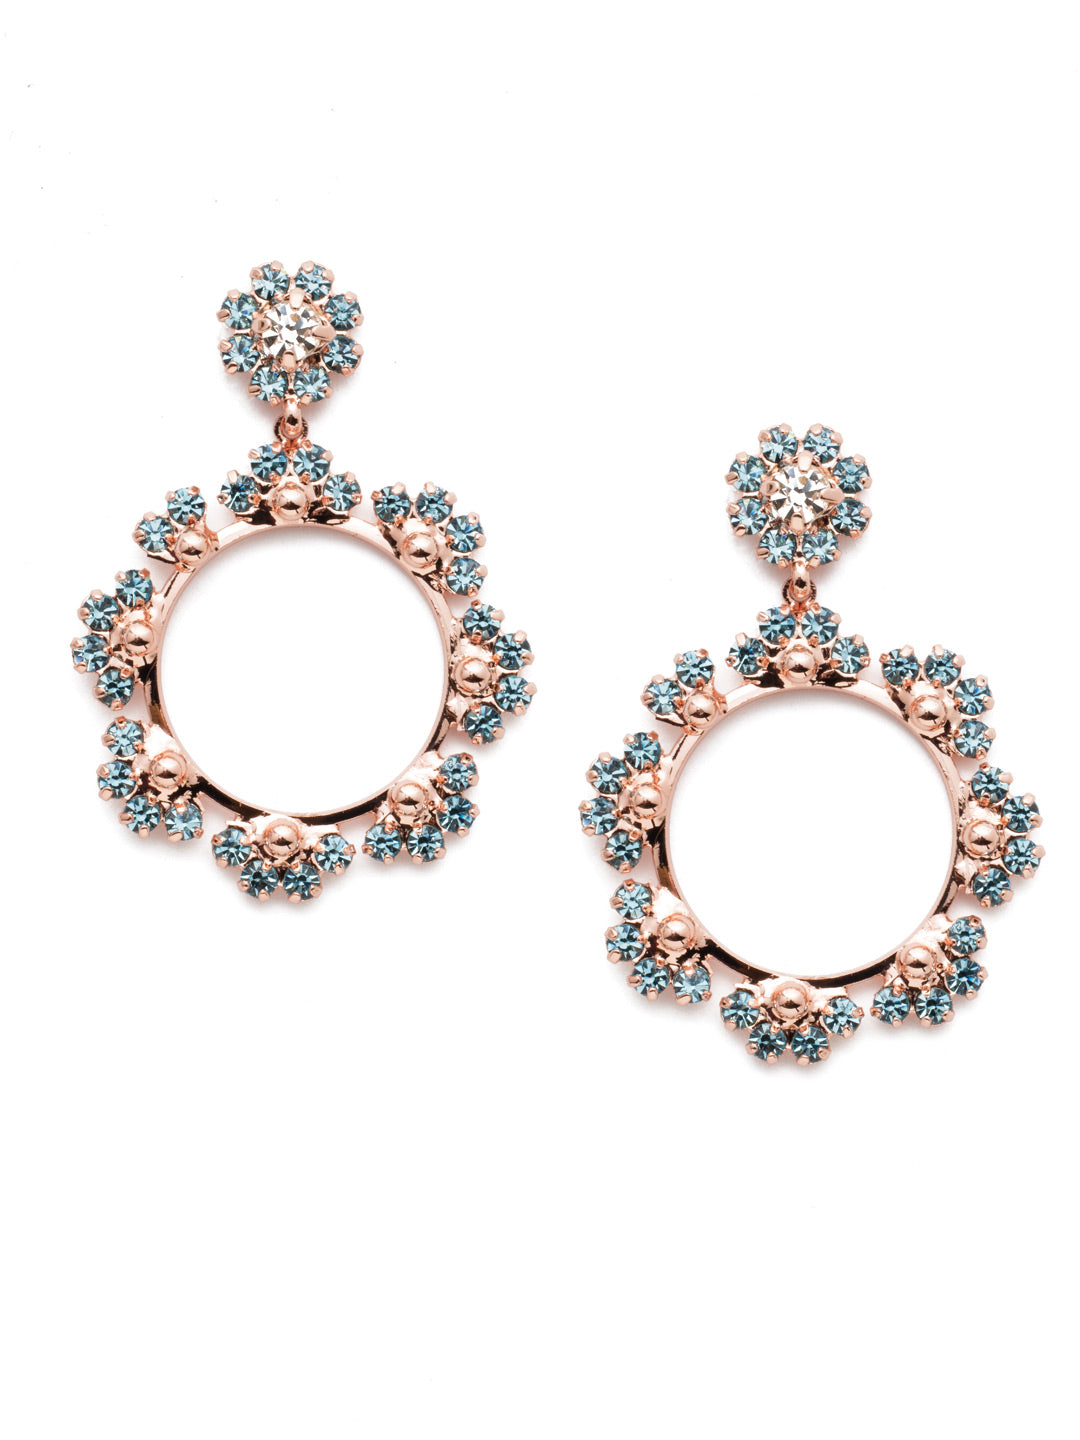 Bryn Statement Earrings - EEP82RGCAZ - Fasten on the Bryn Statement Earrings for a hoop look that stuns with crystal sparkle. This pair is glam and attention-getting gorgeous. From Sorrelli's Crystal Azure collection in our Rose Gold-tone finish.